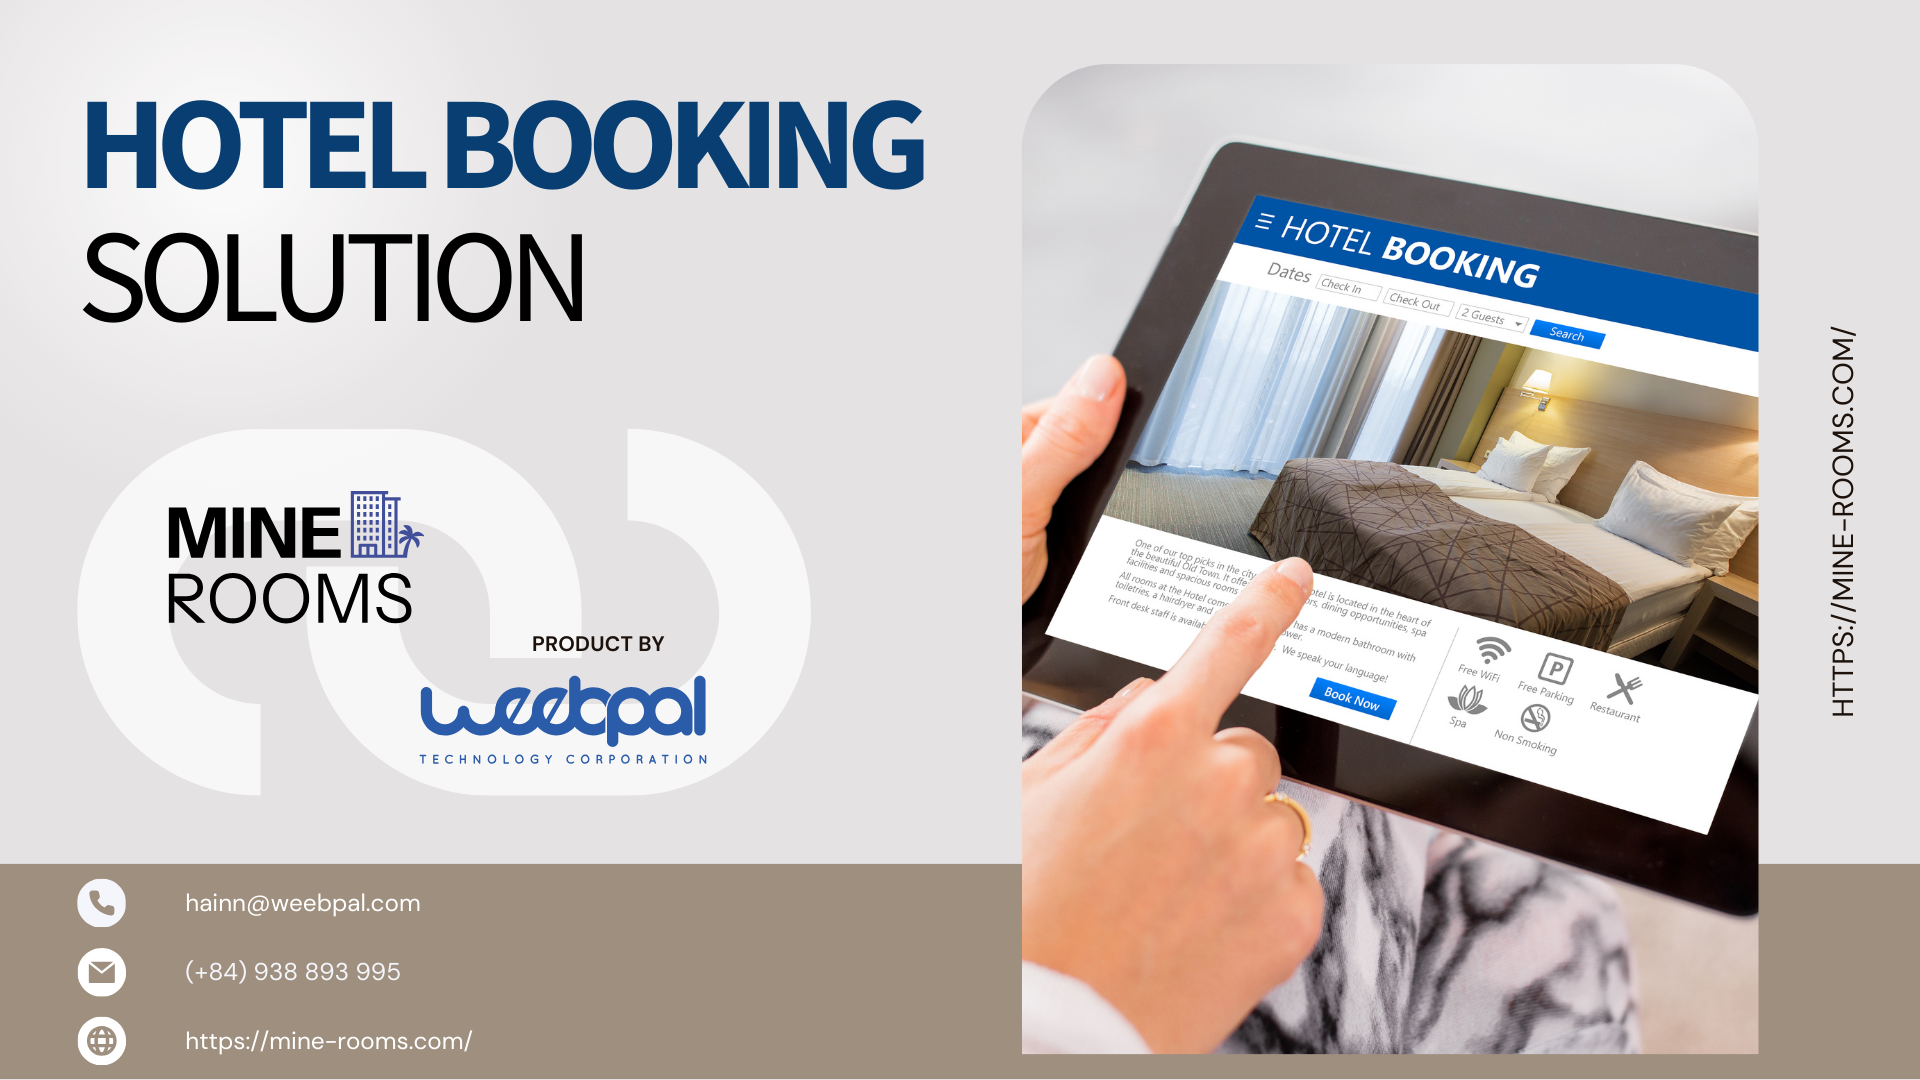 Your Premier Destination for Hotel Booking Solution